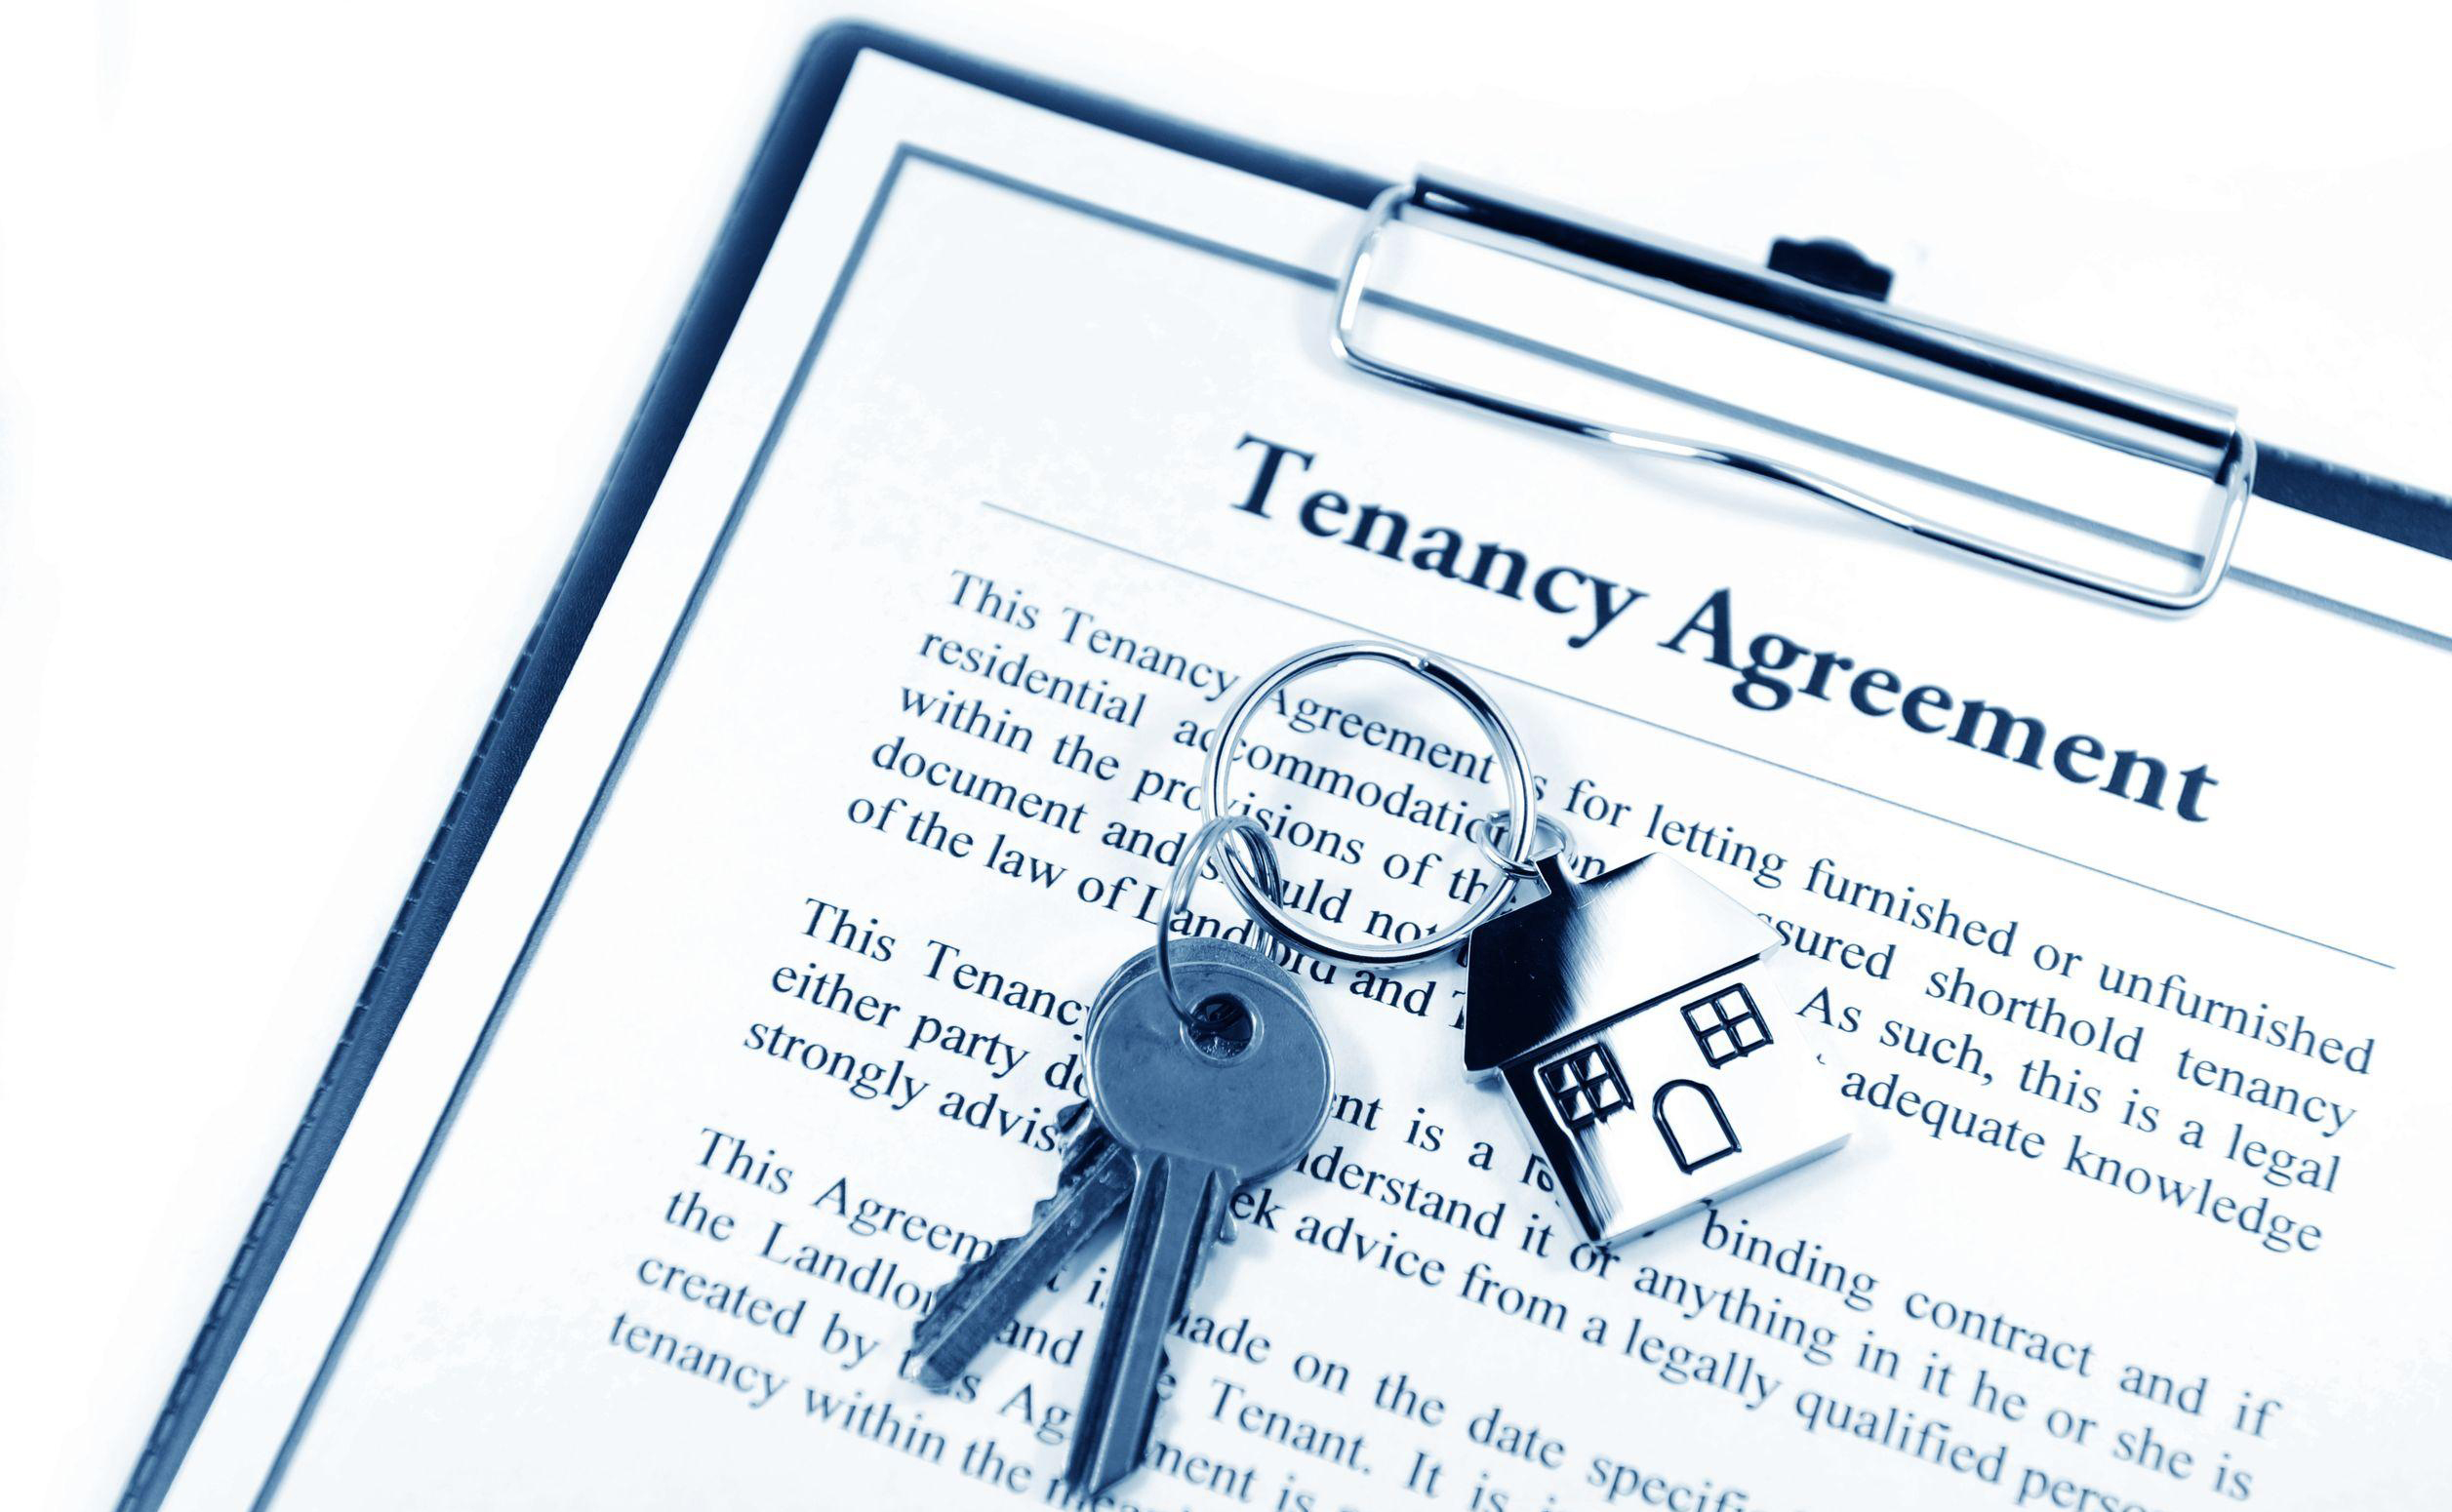 Eviction Without Tenancy Agreement Setting Up A Bullet Proof Tenancy In 2018 Landlordzone